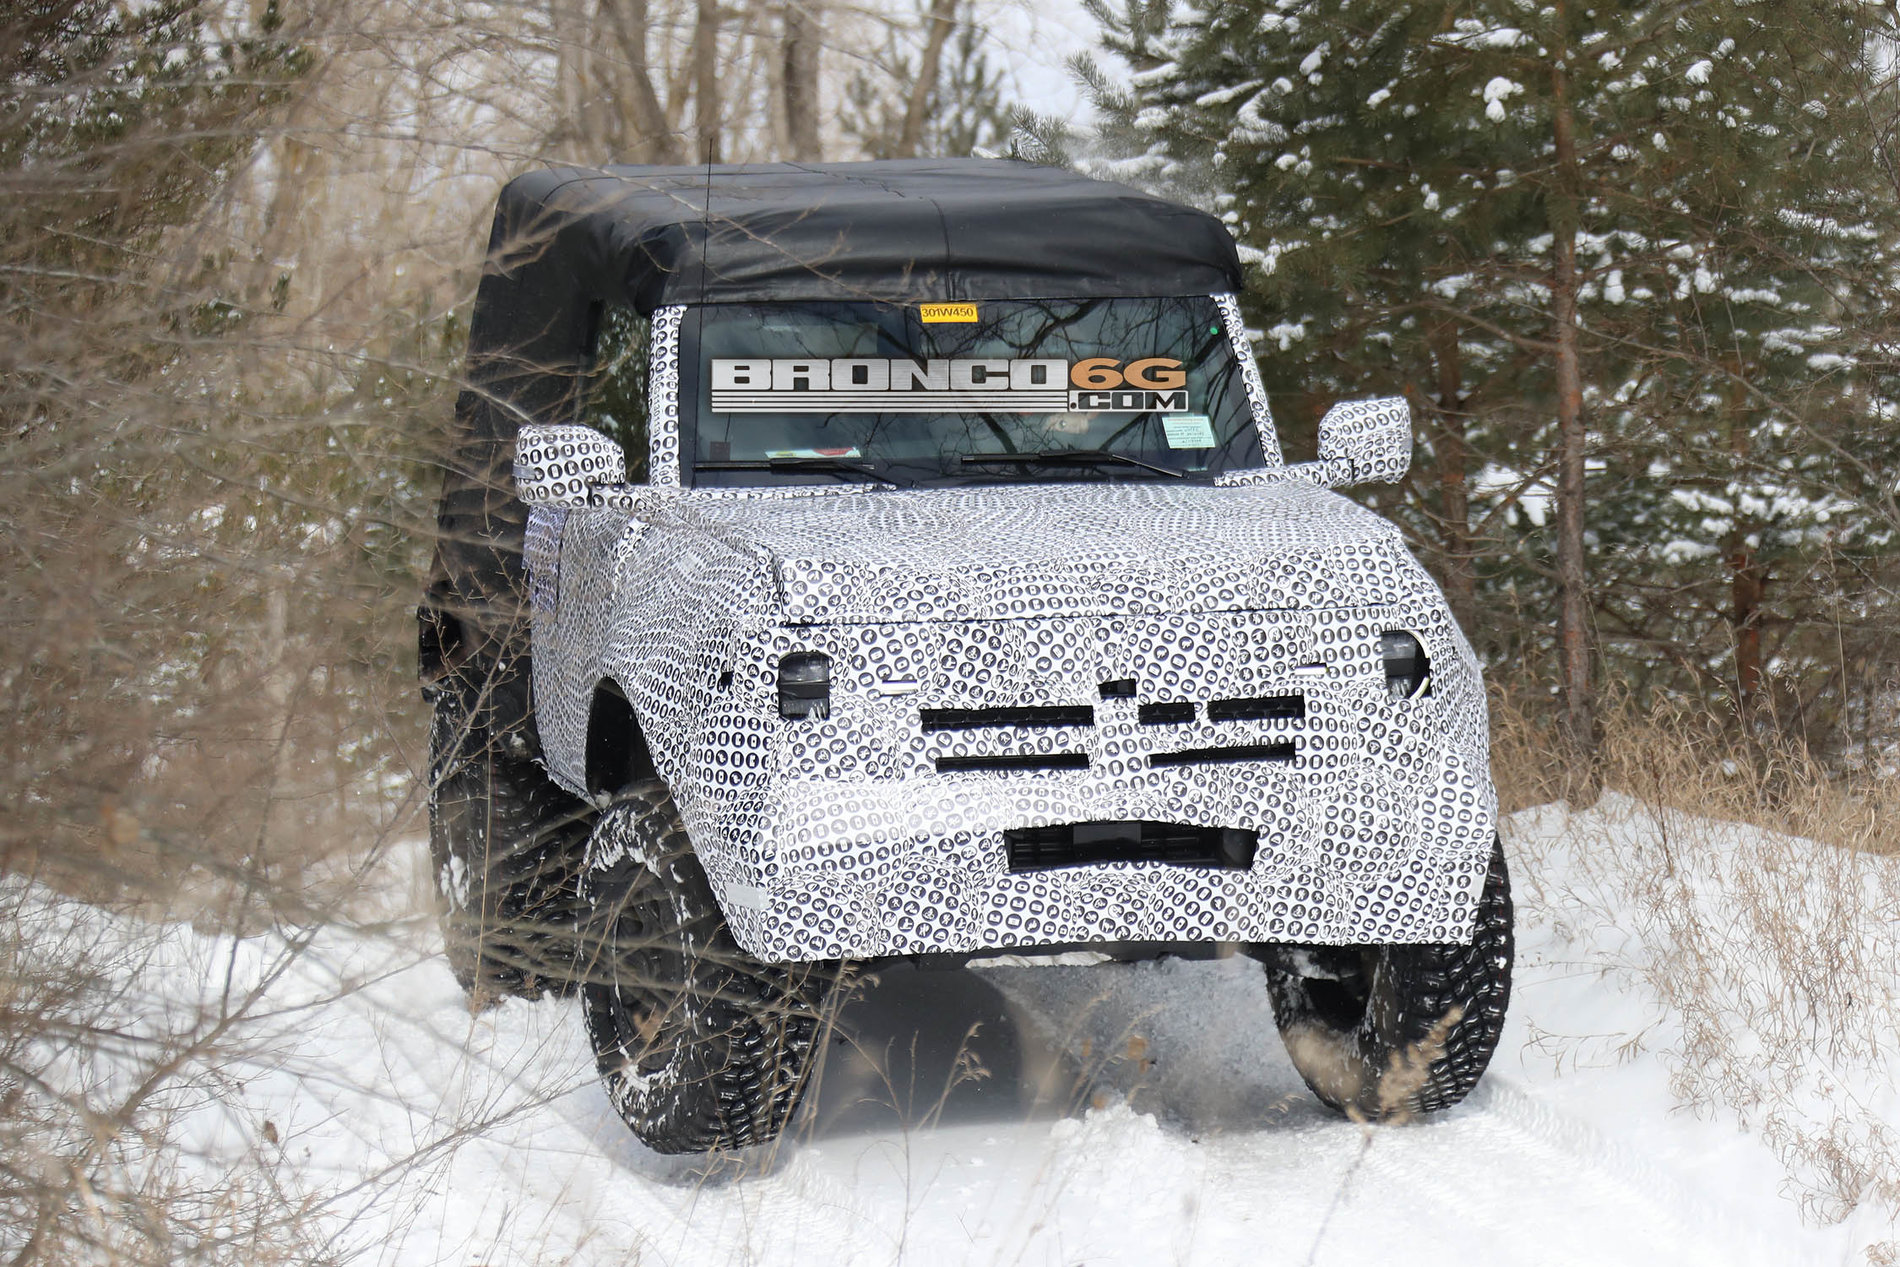 Ford Bronco 2-Door 2021 Bronco Prototype Makes Grand First Appearance, Bombing Through Snow and Catching Air! 2021-Bronco_2door_OffRoad_005